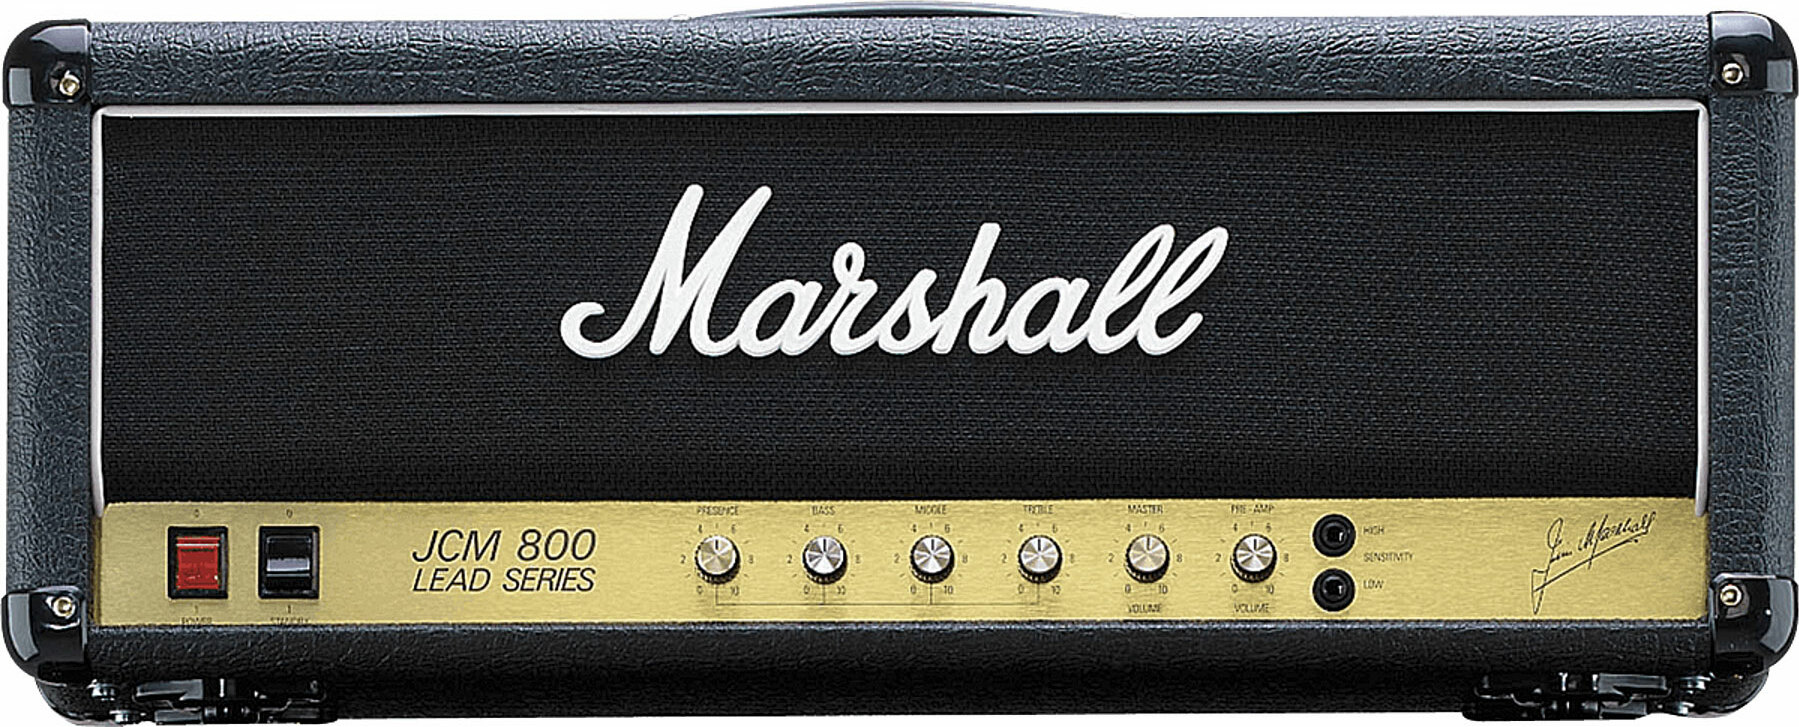 Marshall Jcm800 2203 Vintage Reissue 100w Black - Electric guitar amp head - Main picture